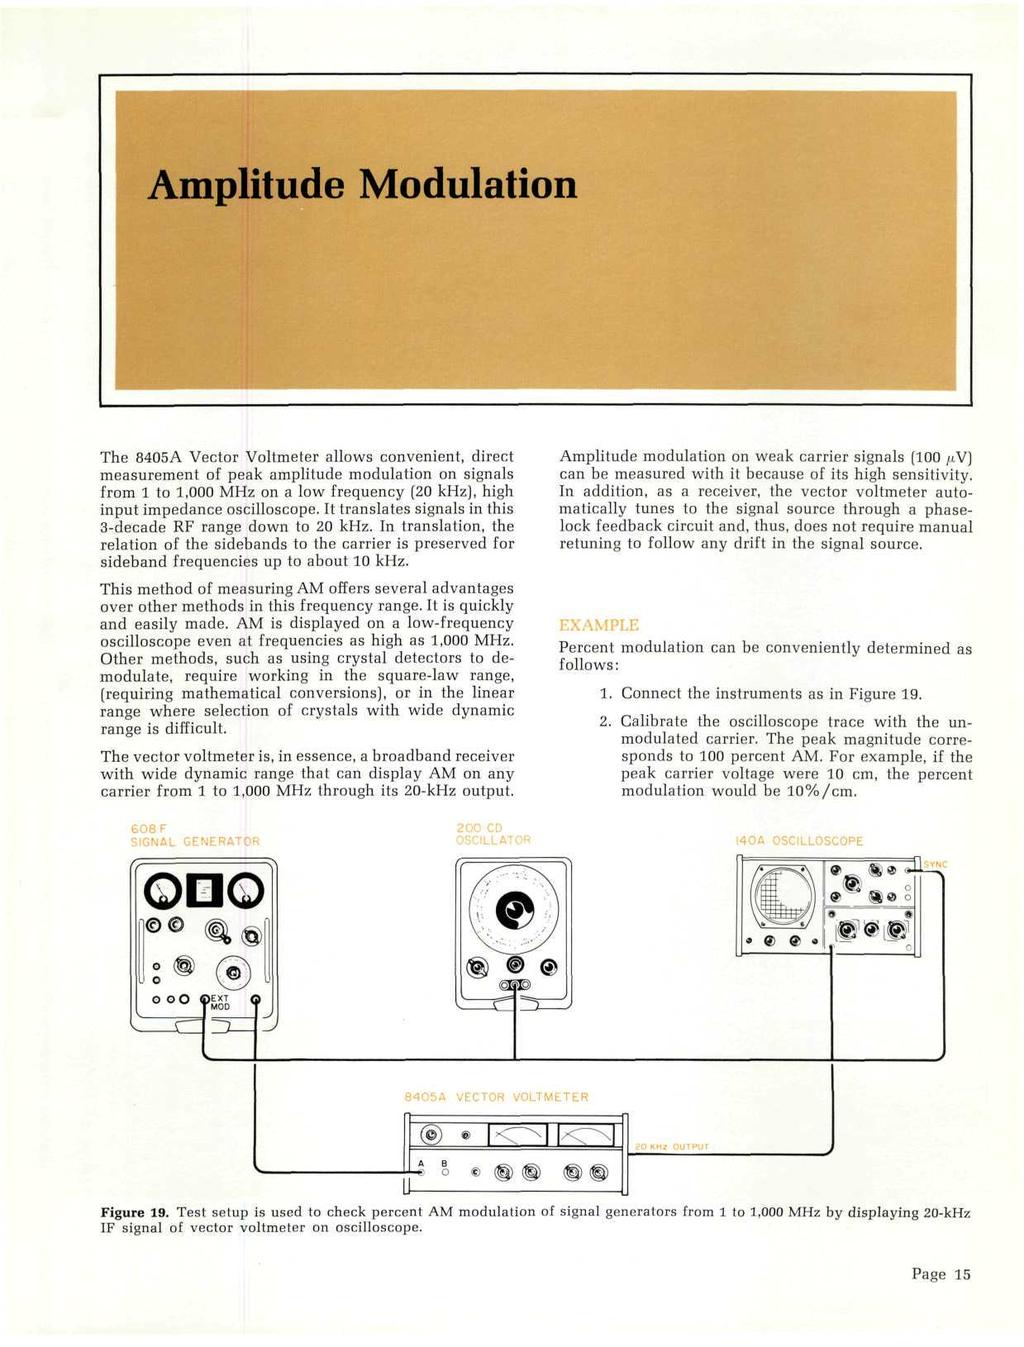 I Amplitude Modulation The 8405A Vector Voltmeter allows convenient, direct measurement of peak amplitude modulation on signals from 1 to 1,000 MHz on a low frequency (20 khz), high input impedance